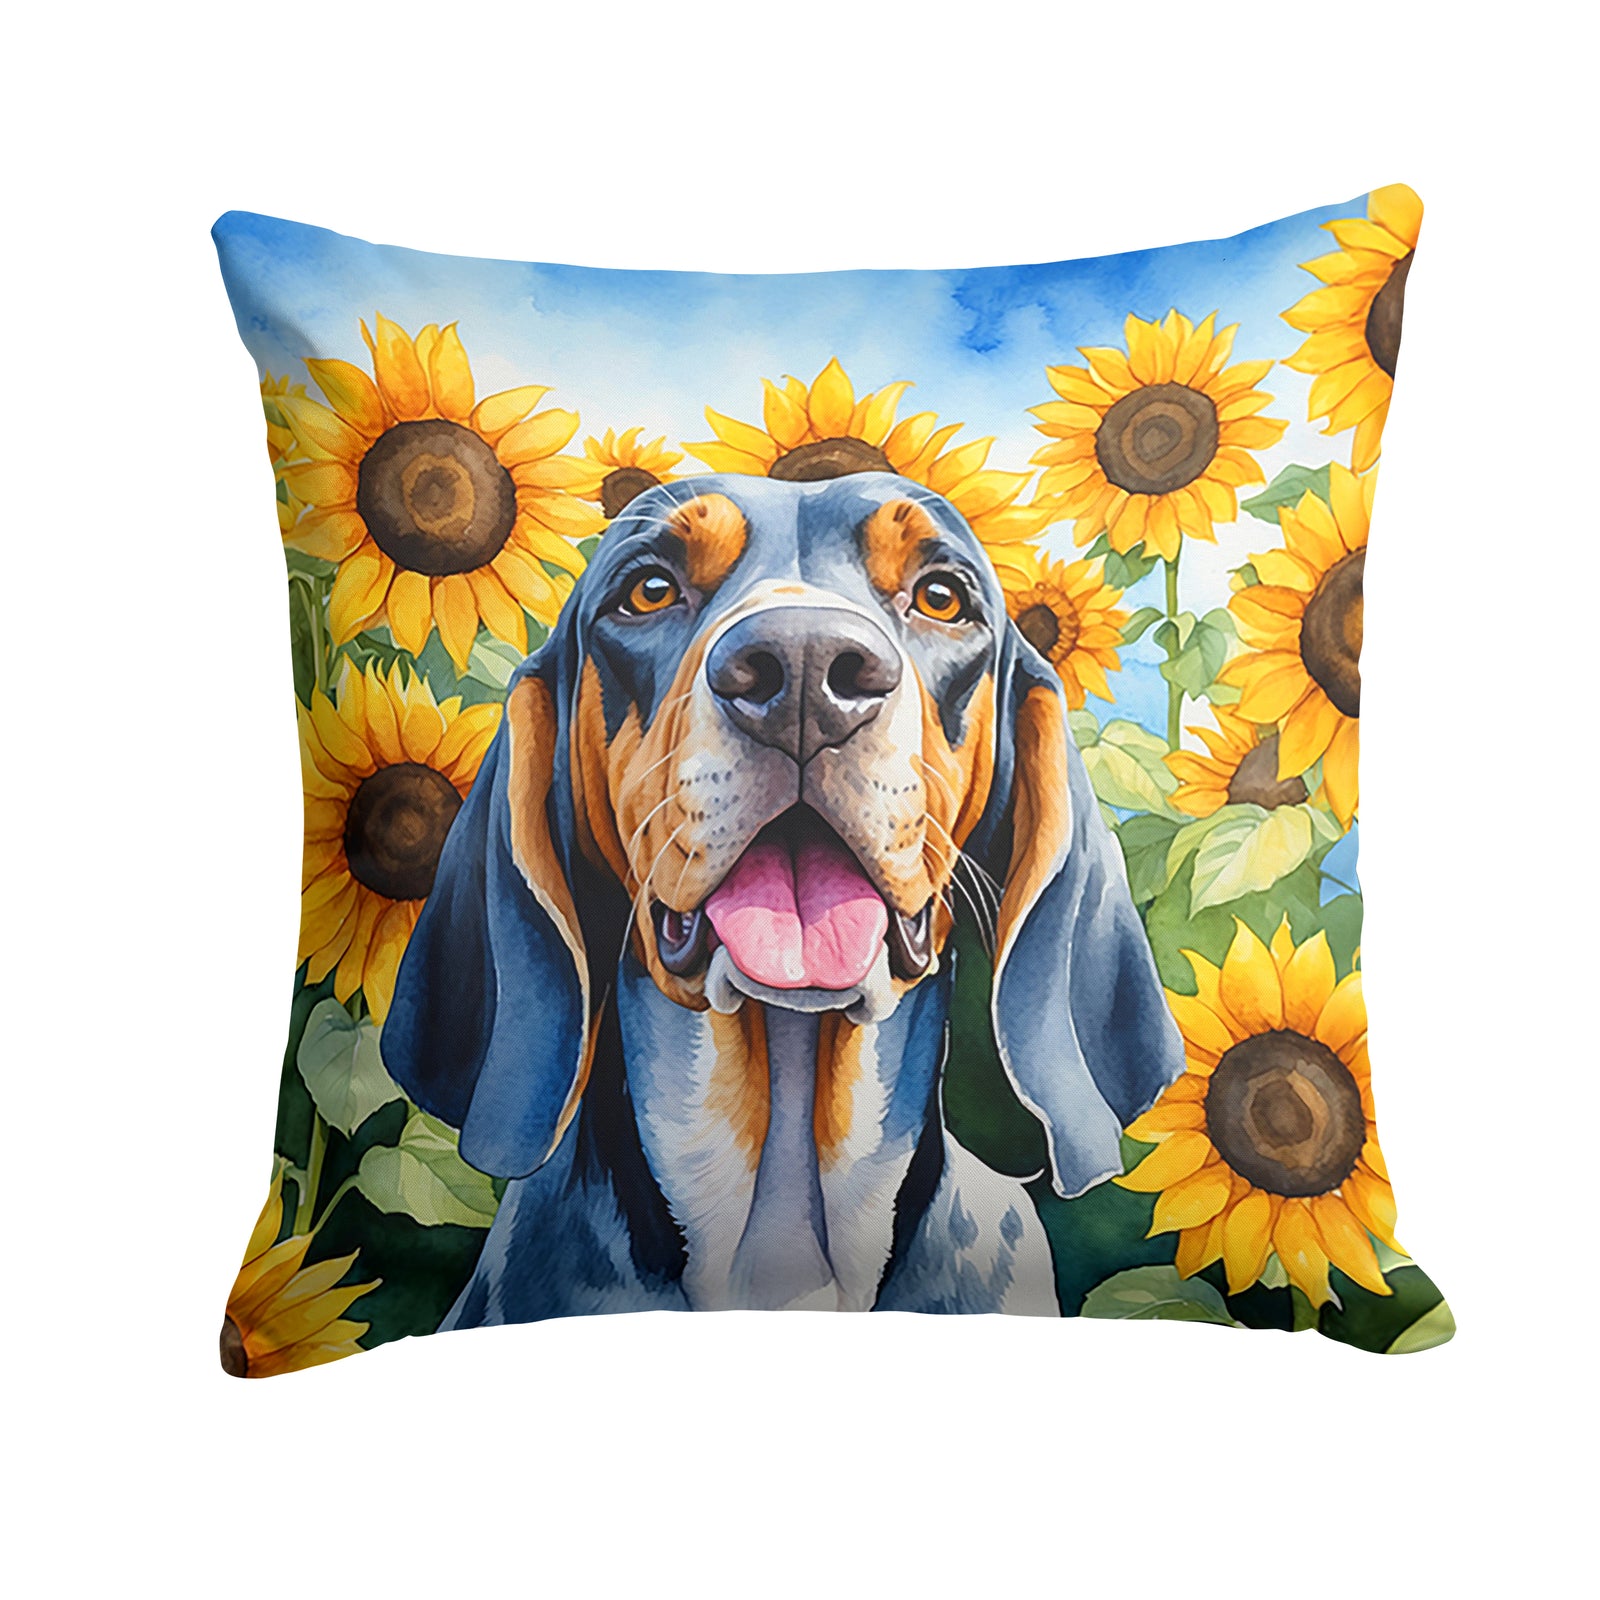 Buy this American English Coonhound in Sunflowers Throw Pillow